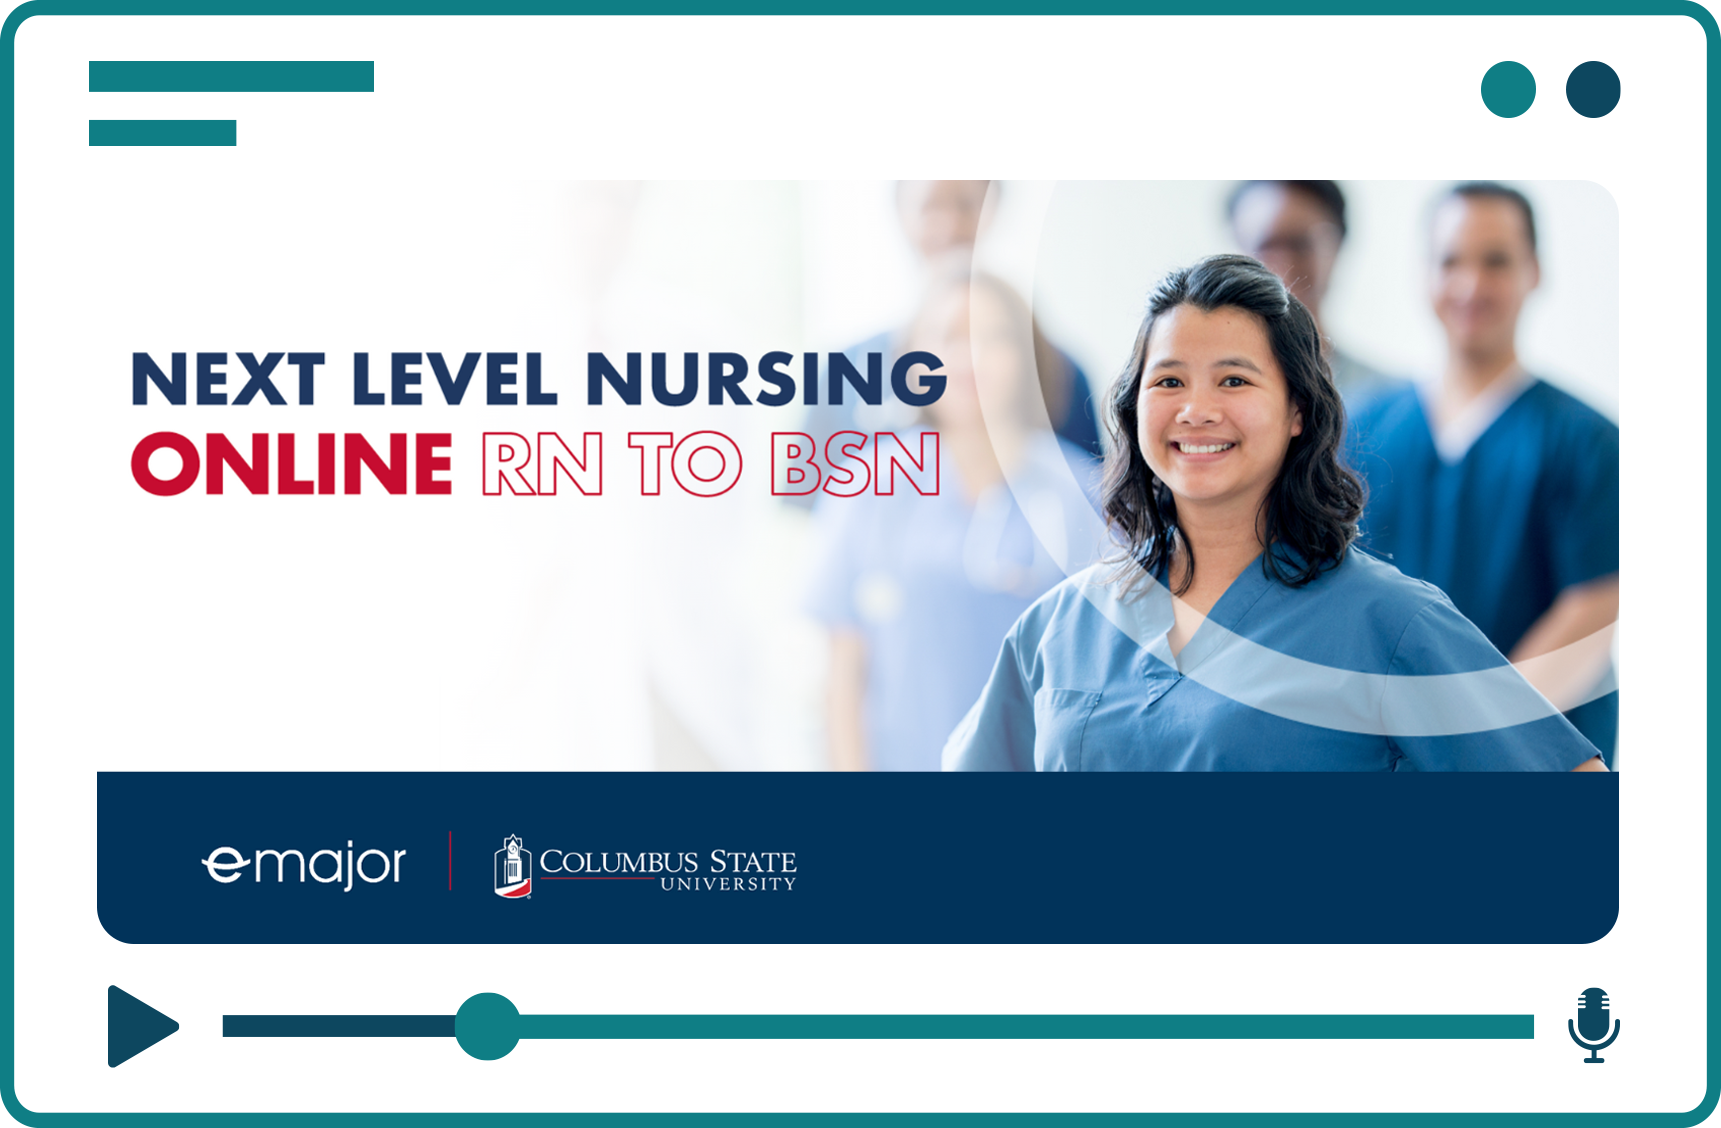 nurse smiling while in webinar sessions